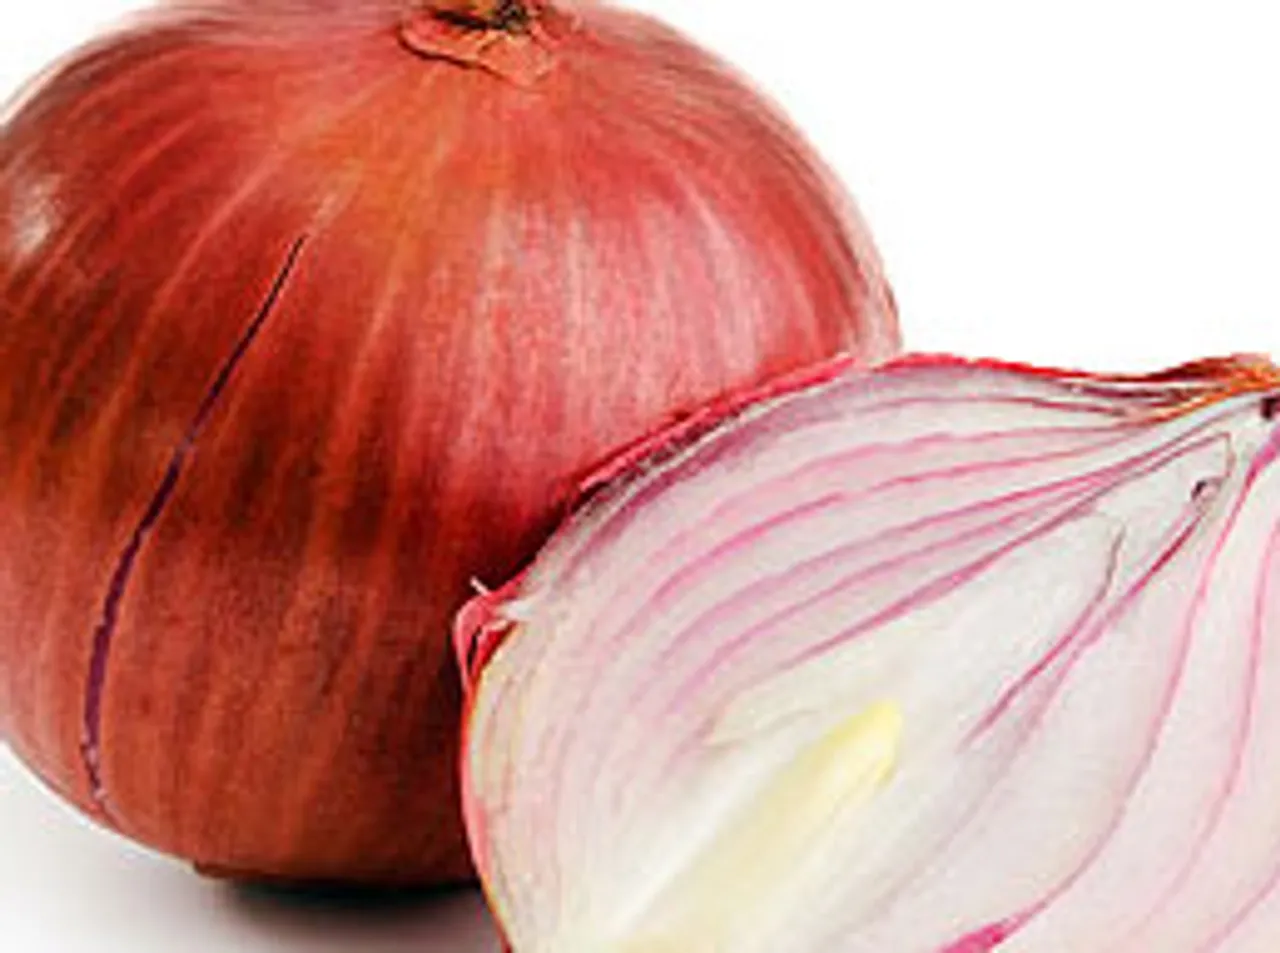 why do onions make us cry